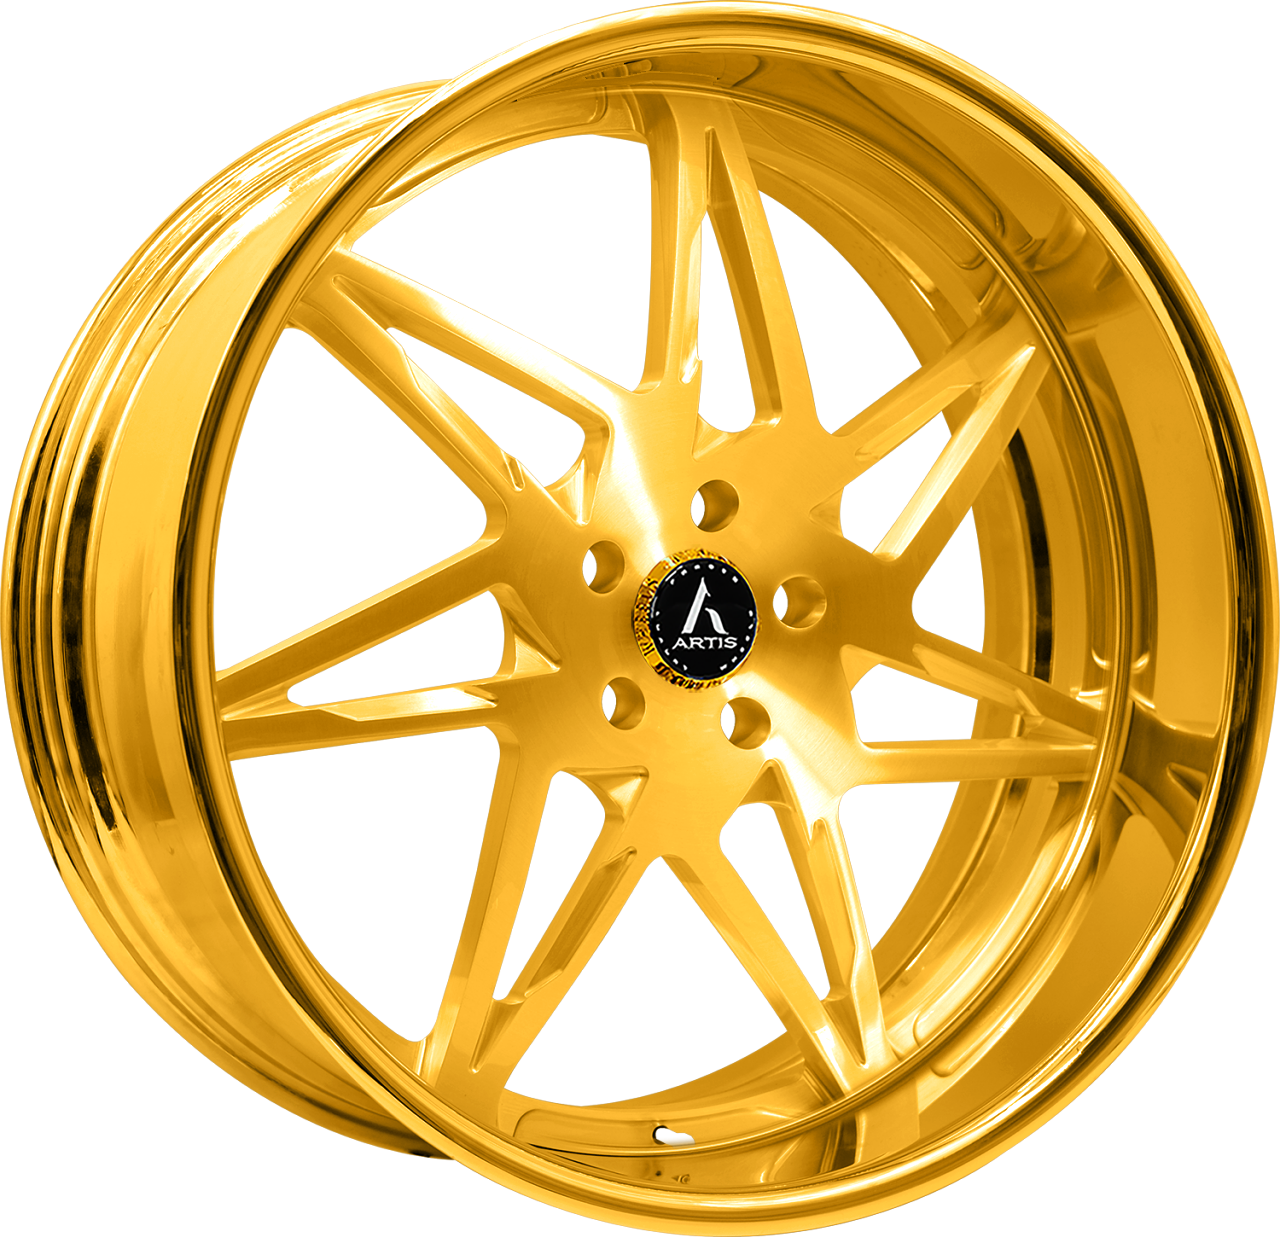 Artis Forged Nirvana-M wheel with Gold finish